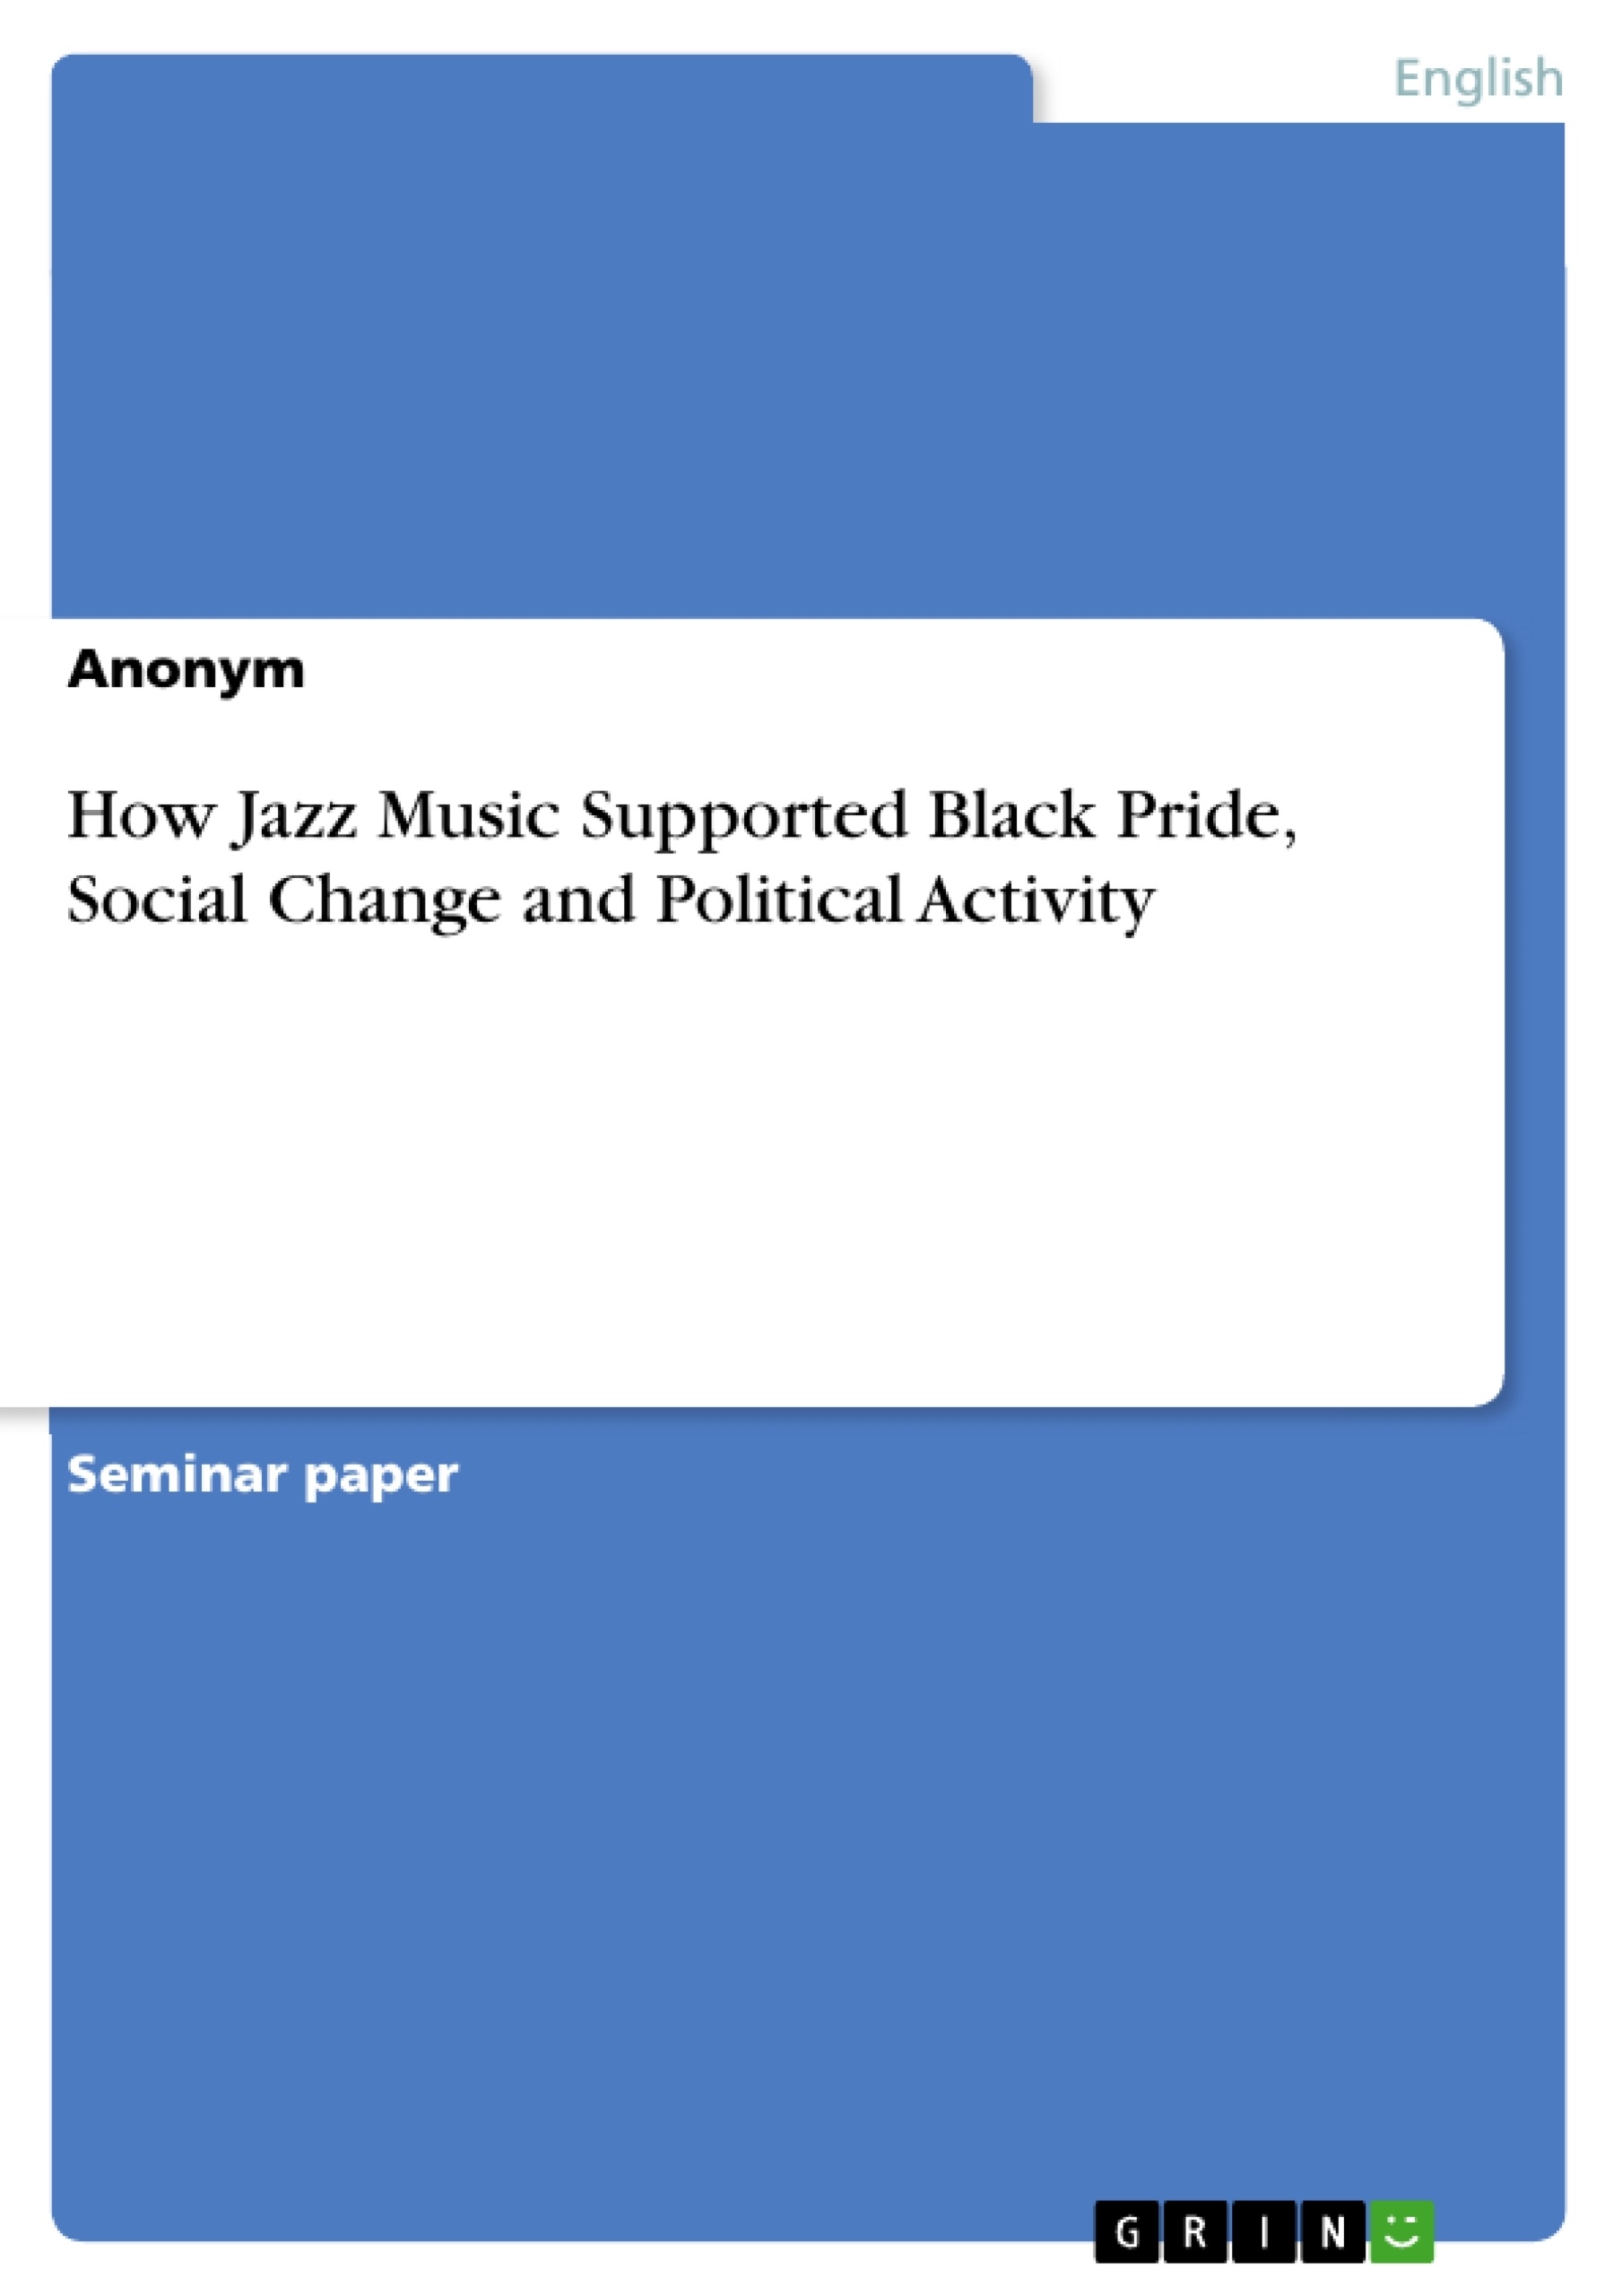 Title: How Jazz Music Supported Black Pride, Social Change and Political Activity